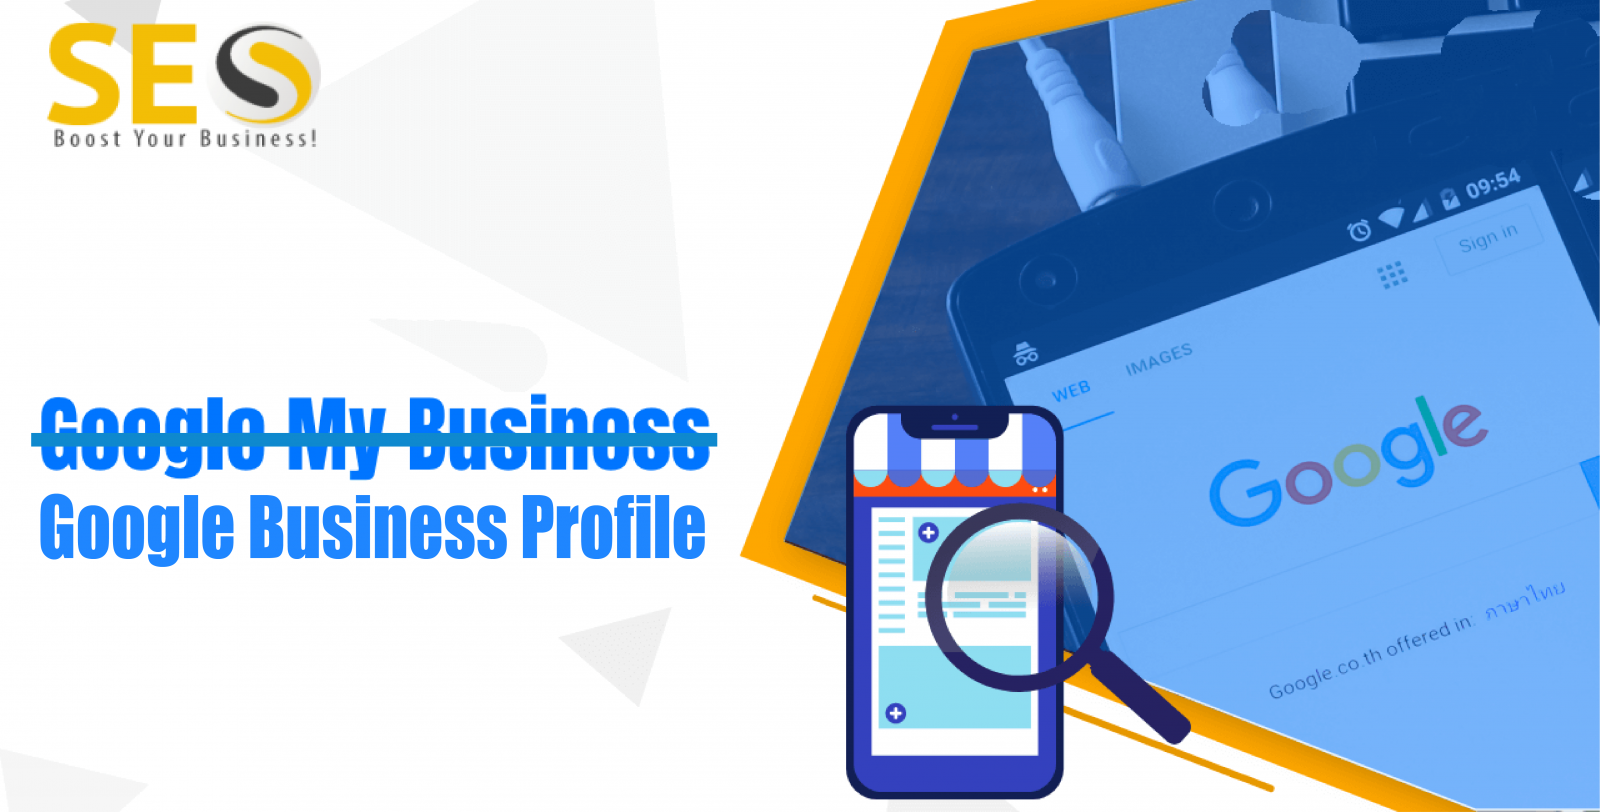 Google Business Profile is the New Google My Business